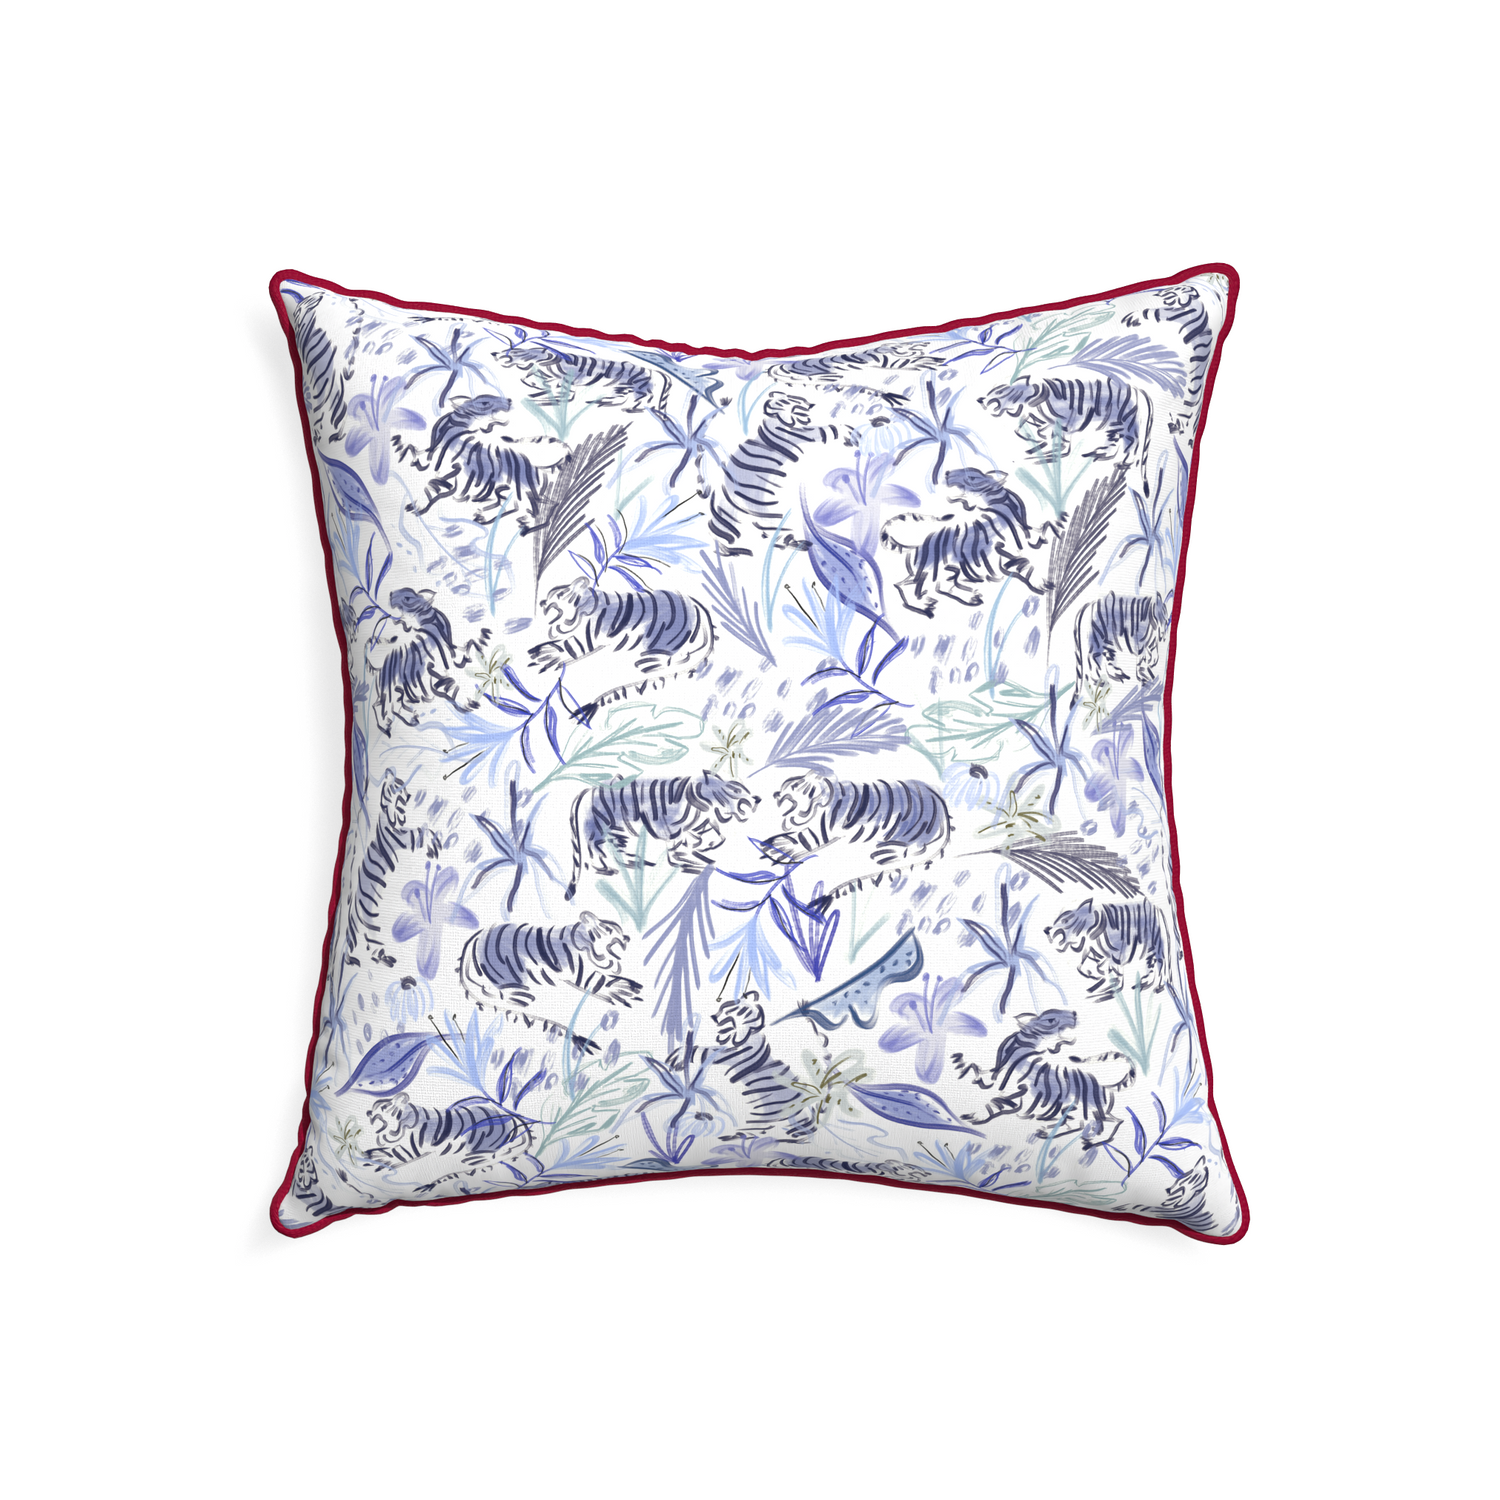 22-square frida blue custom blue with intricate tiger designpillow with raspberry piping on white background